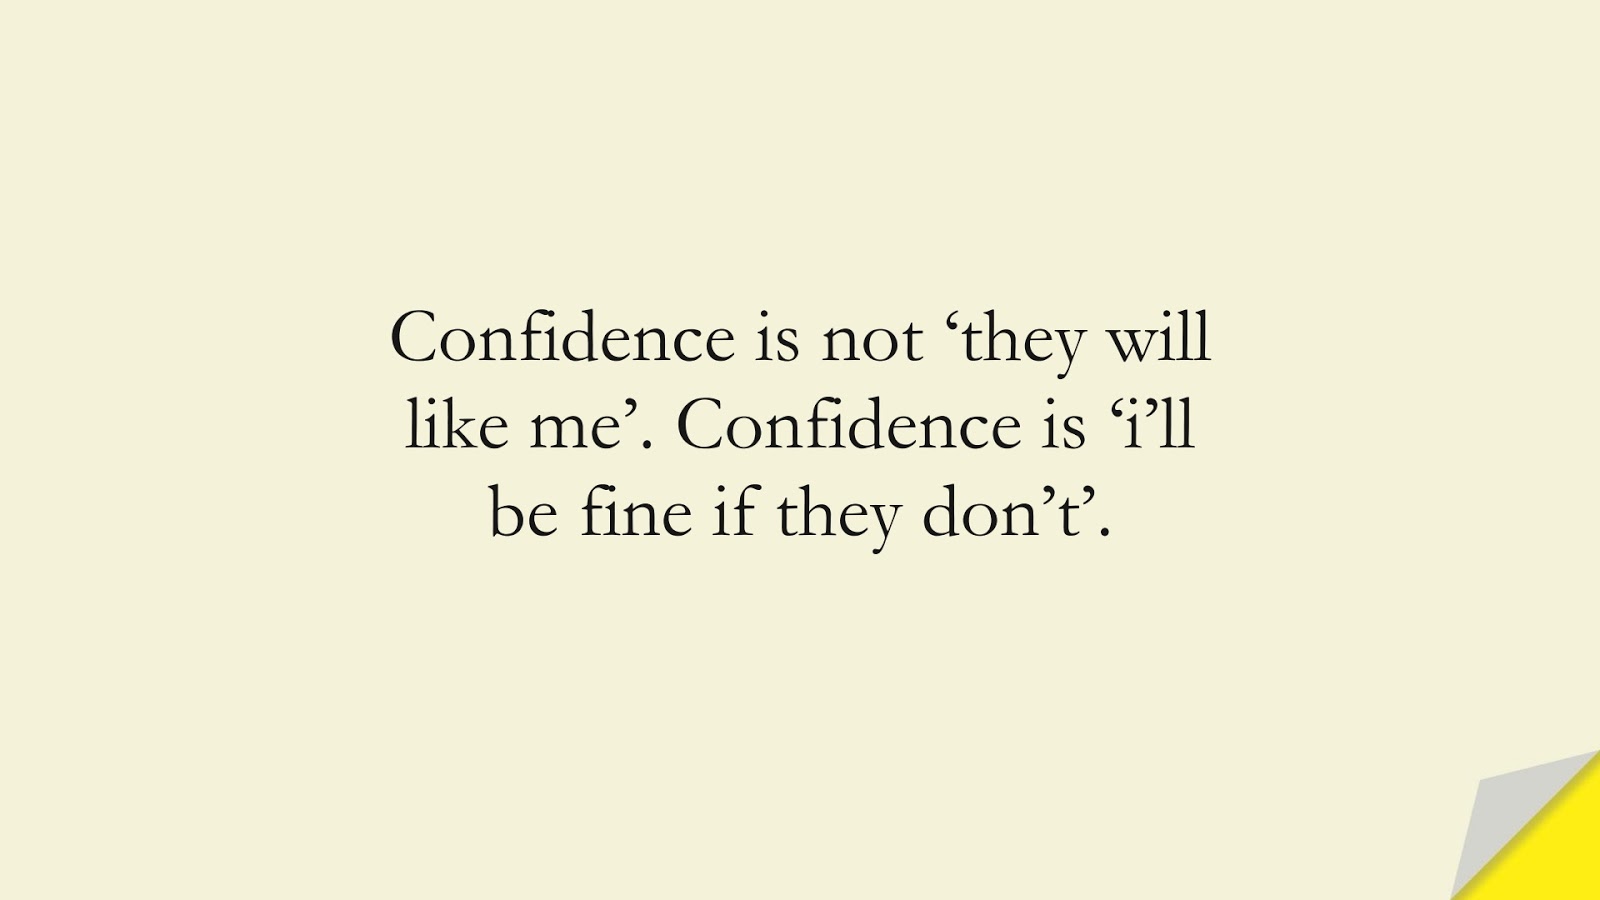 Confidence is not ‘they will like me’. Confidence is ‘i’ll be fine if they don’t’.FALSE